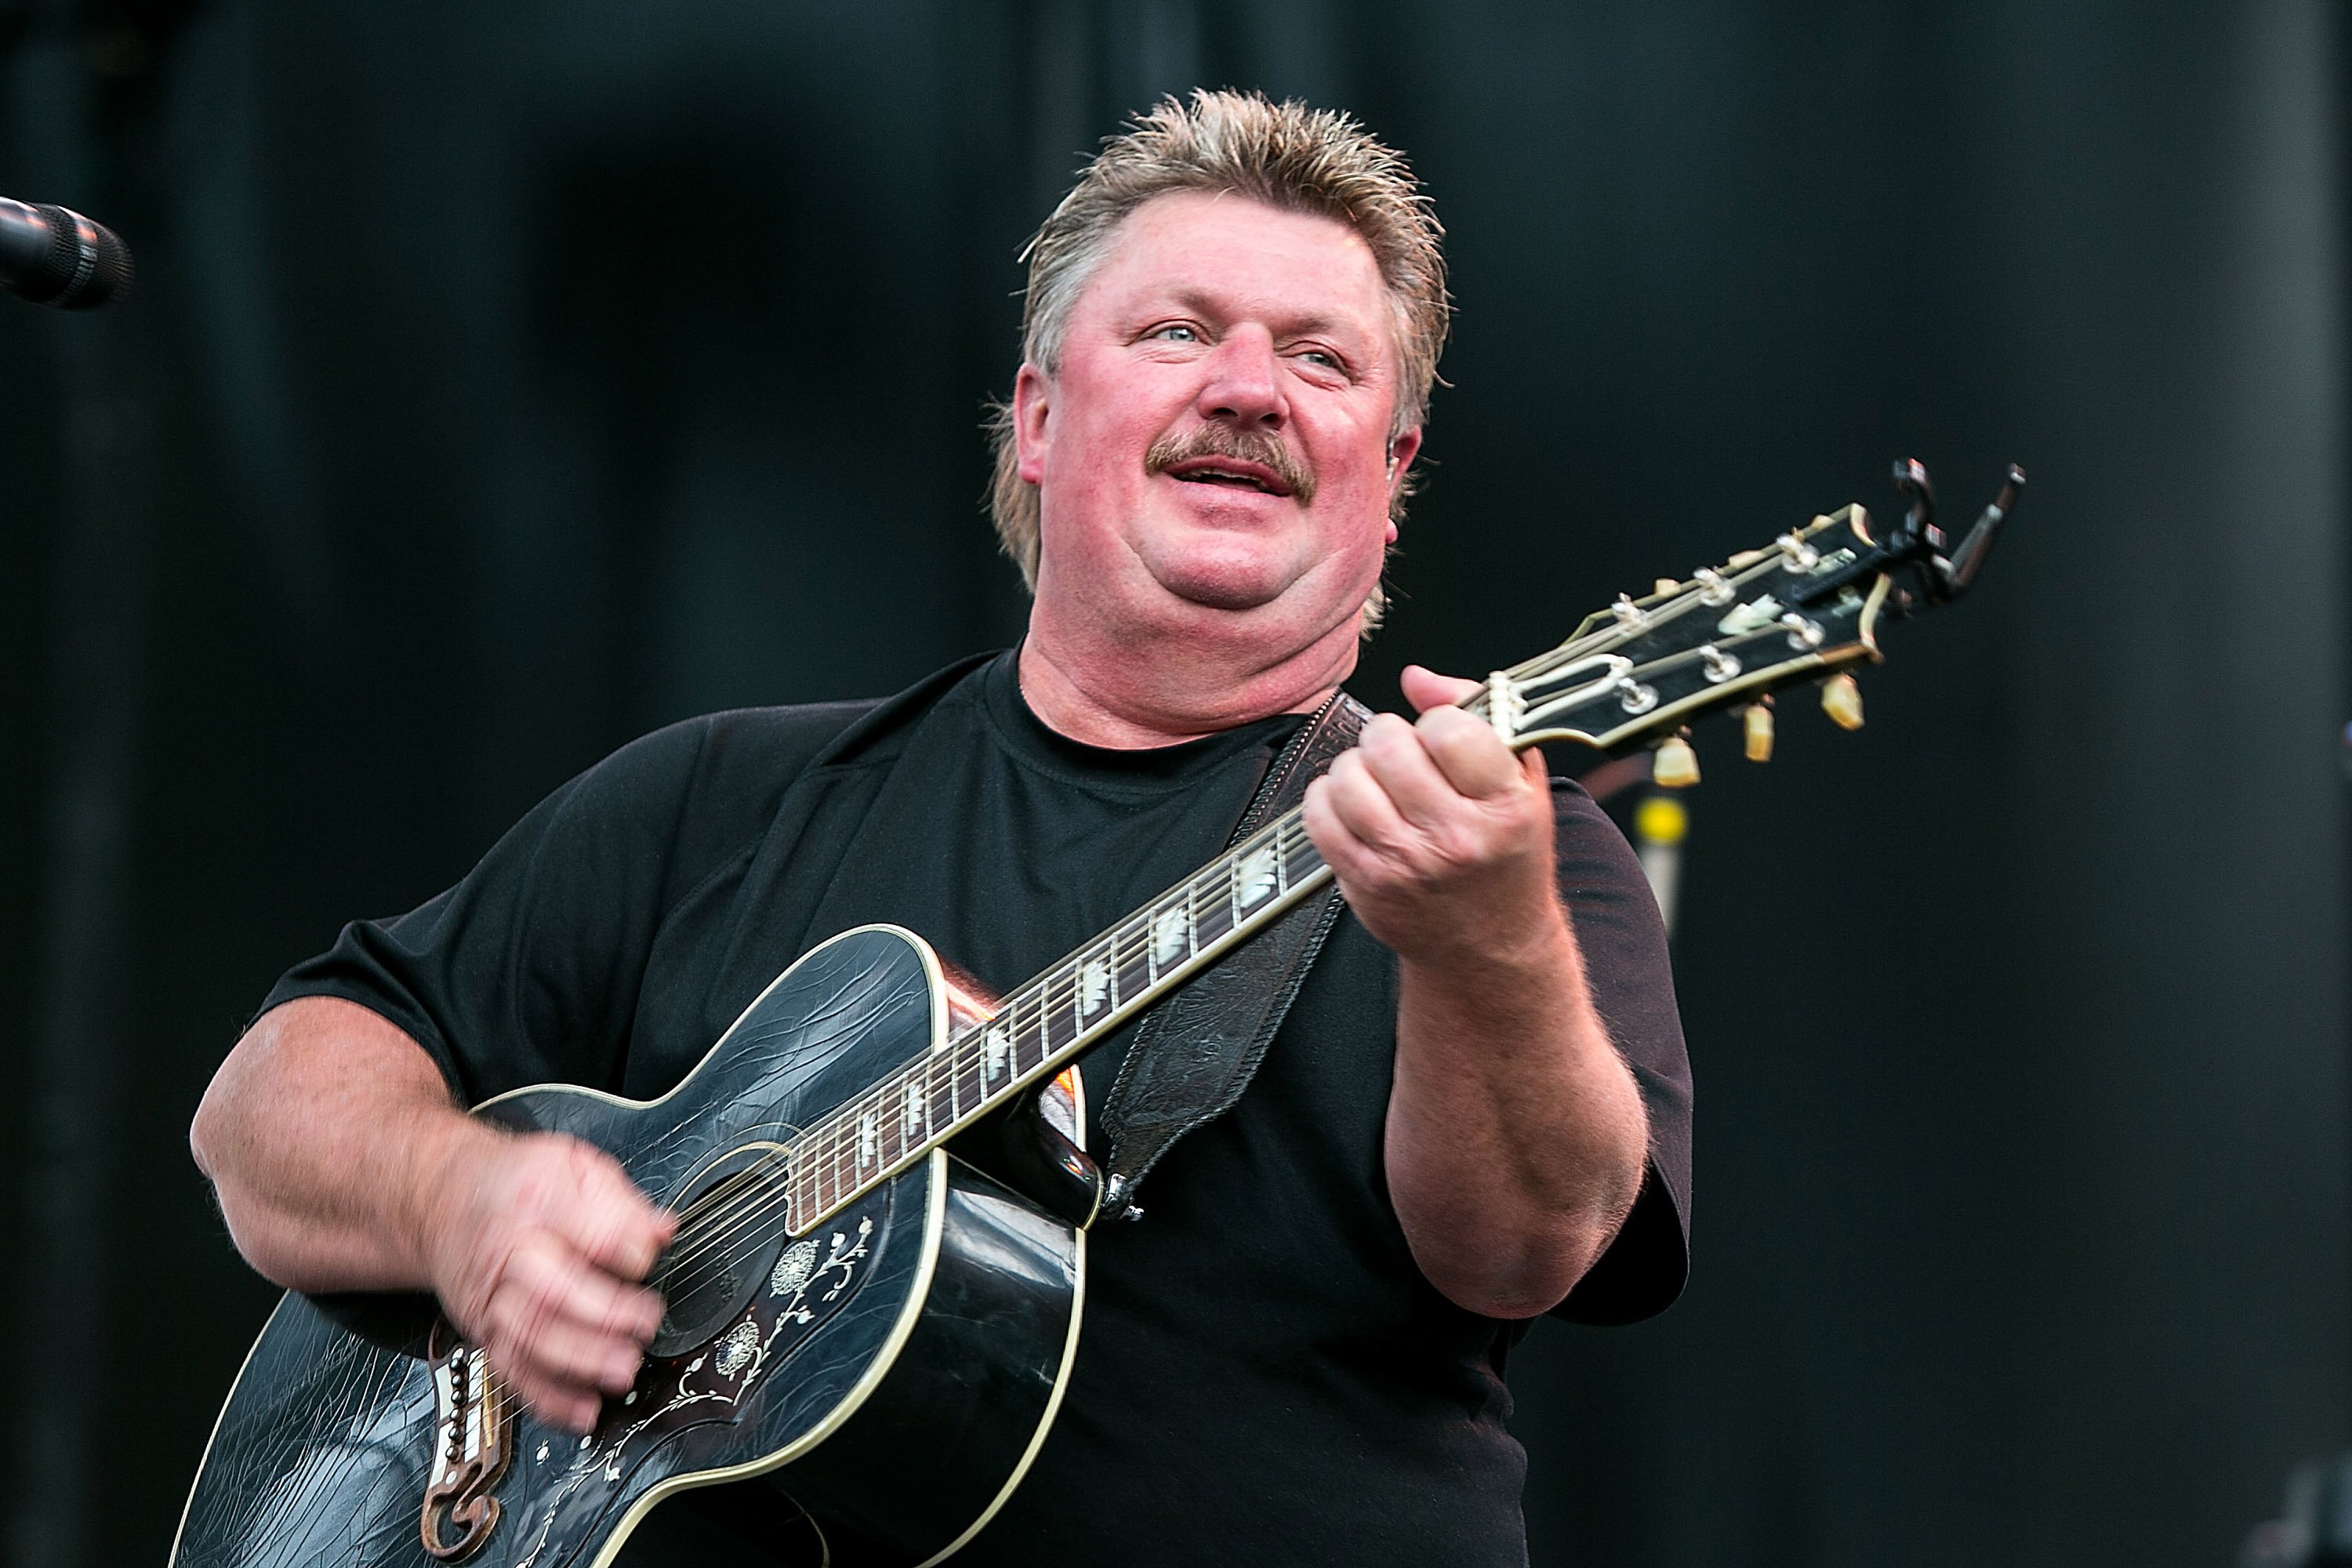 Joe Diffie performs on stage at the Watershed Music Festival 2014 on August 2, 2014, in George, Washington. | Source: Getty Images.